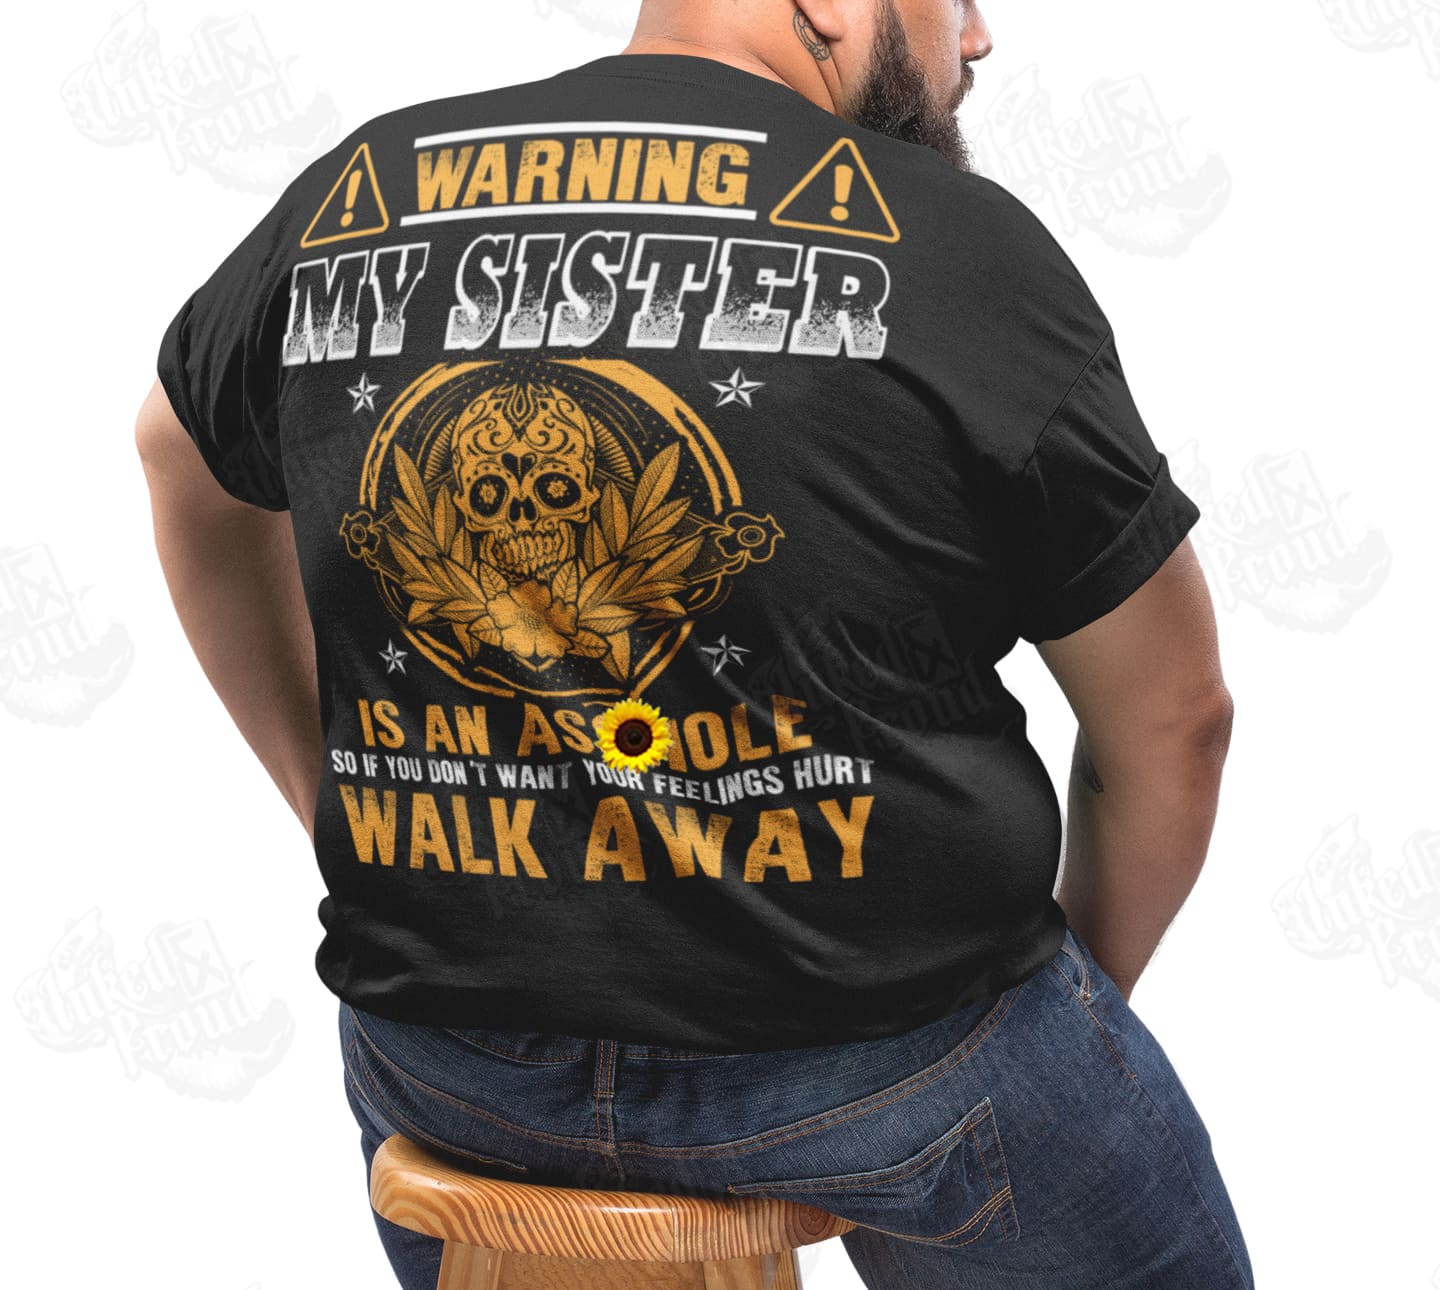 My sister is an asshole so if you don't want your feelings hurts walk away - Gift for sister, family T-shirt